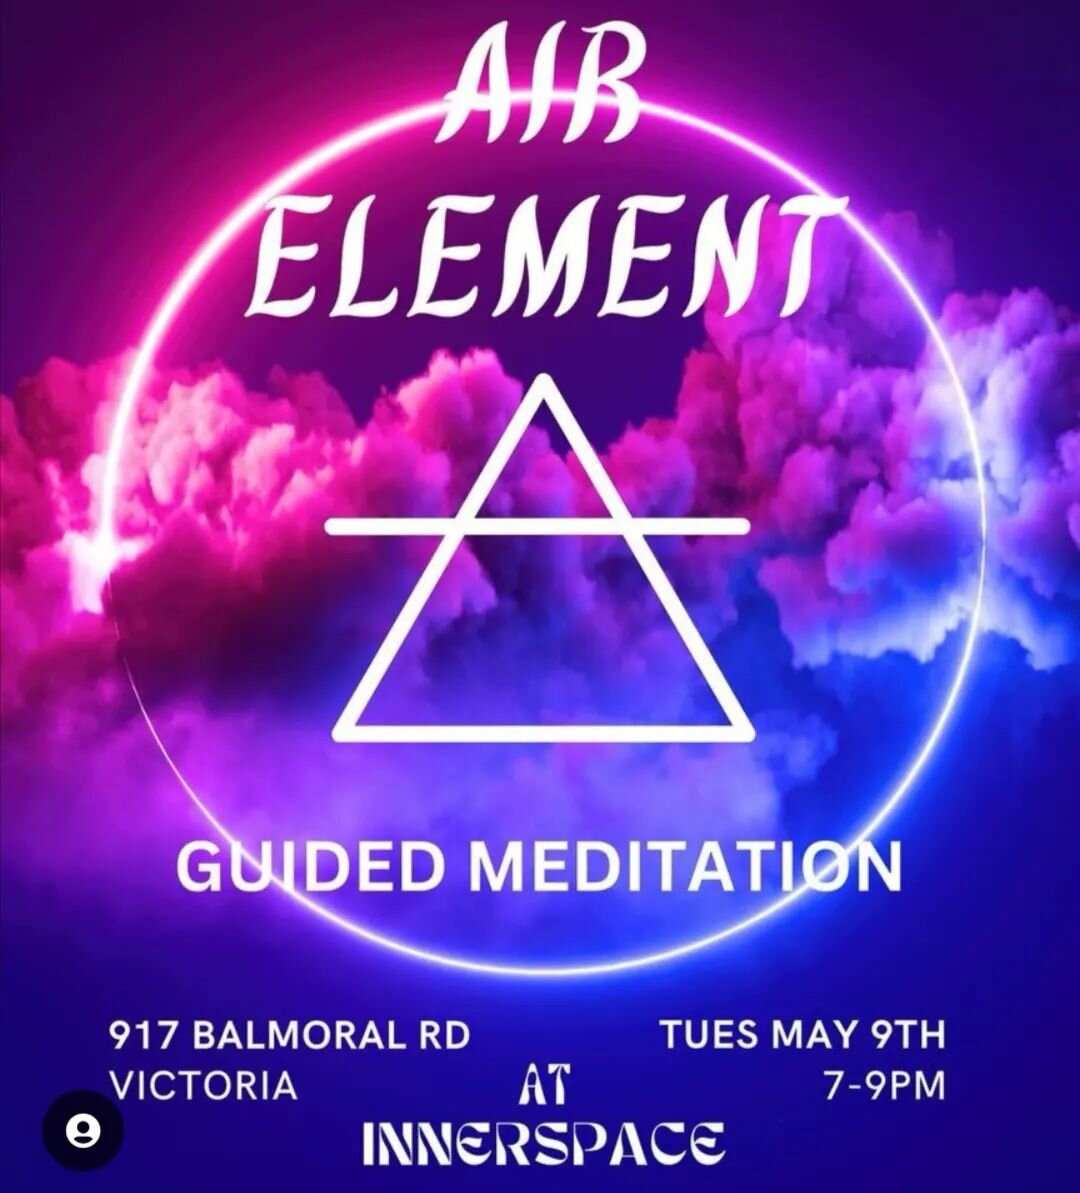 Come join @the.different.tom.different and I for our first collaboration! 

The evening includes 
✨Guided body movement
✨Breathwork
✨Chakra balancing
✨Magical guided meditation 
🍄Optional microdose by donation

$25 in advance, DM to book 

Hosted at